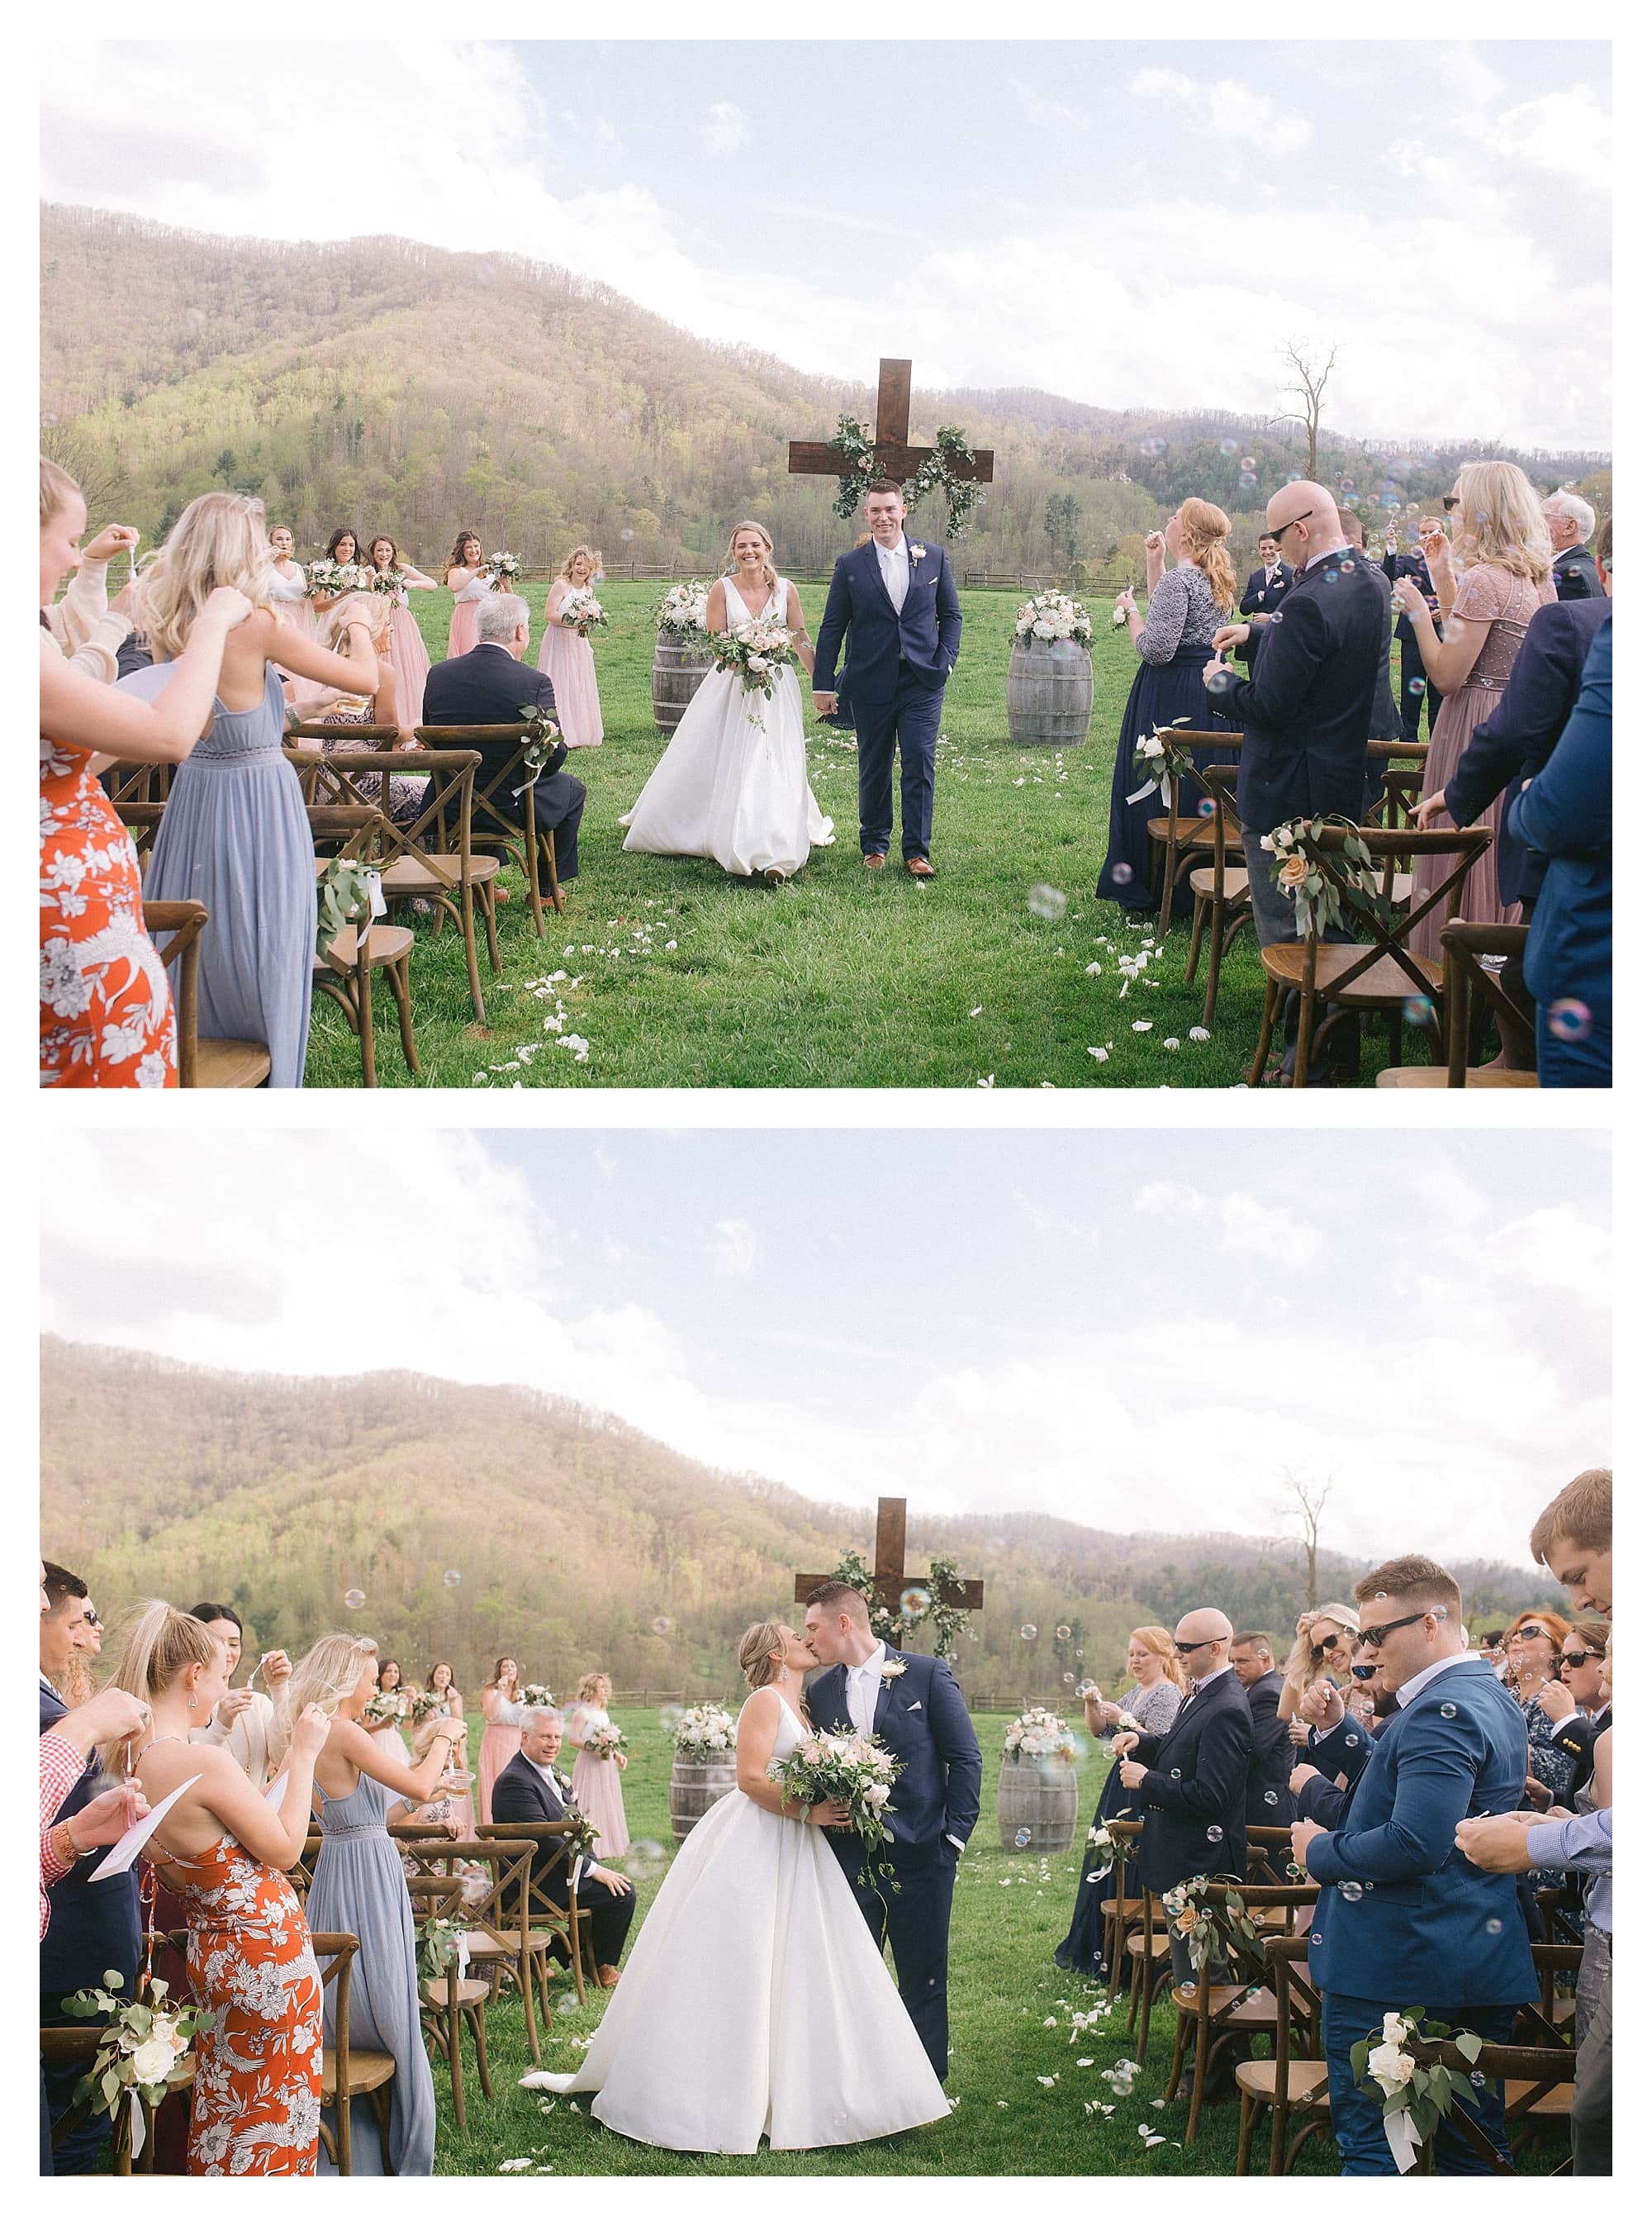 Wedding ceremony outdoors in grassy field among mountains - bride and groom walking down the aisle together post ceremony